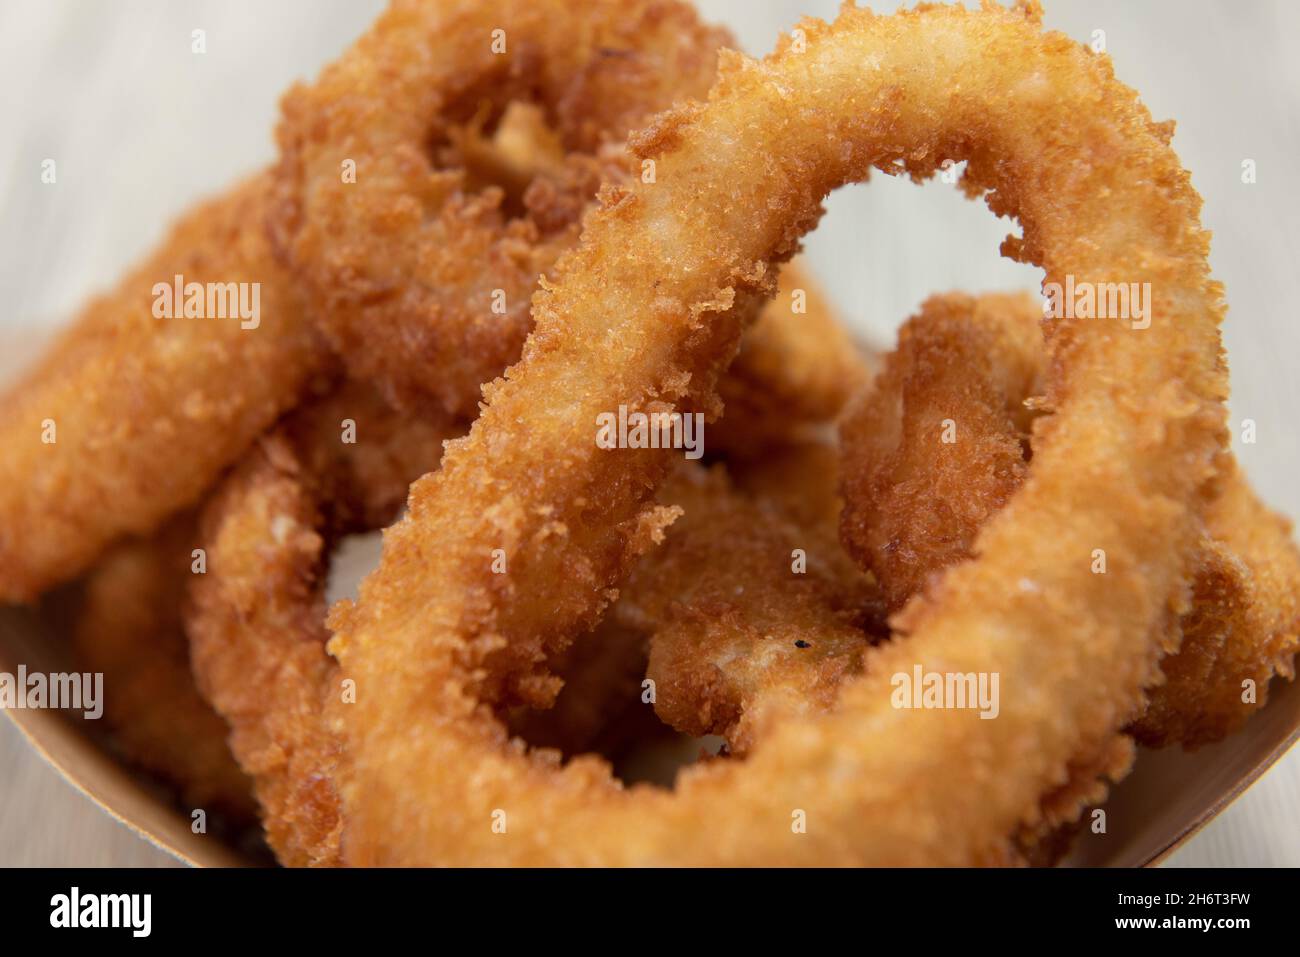 Close up of texture of crispy side order of onion rings contained in a cardboard boat to eat on the go. Stock Photo